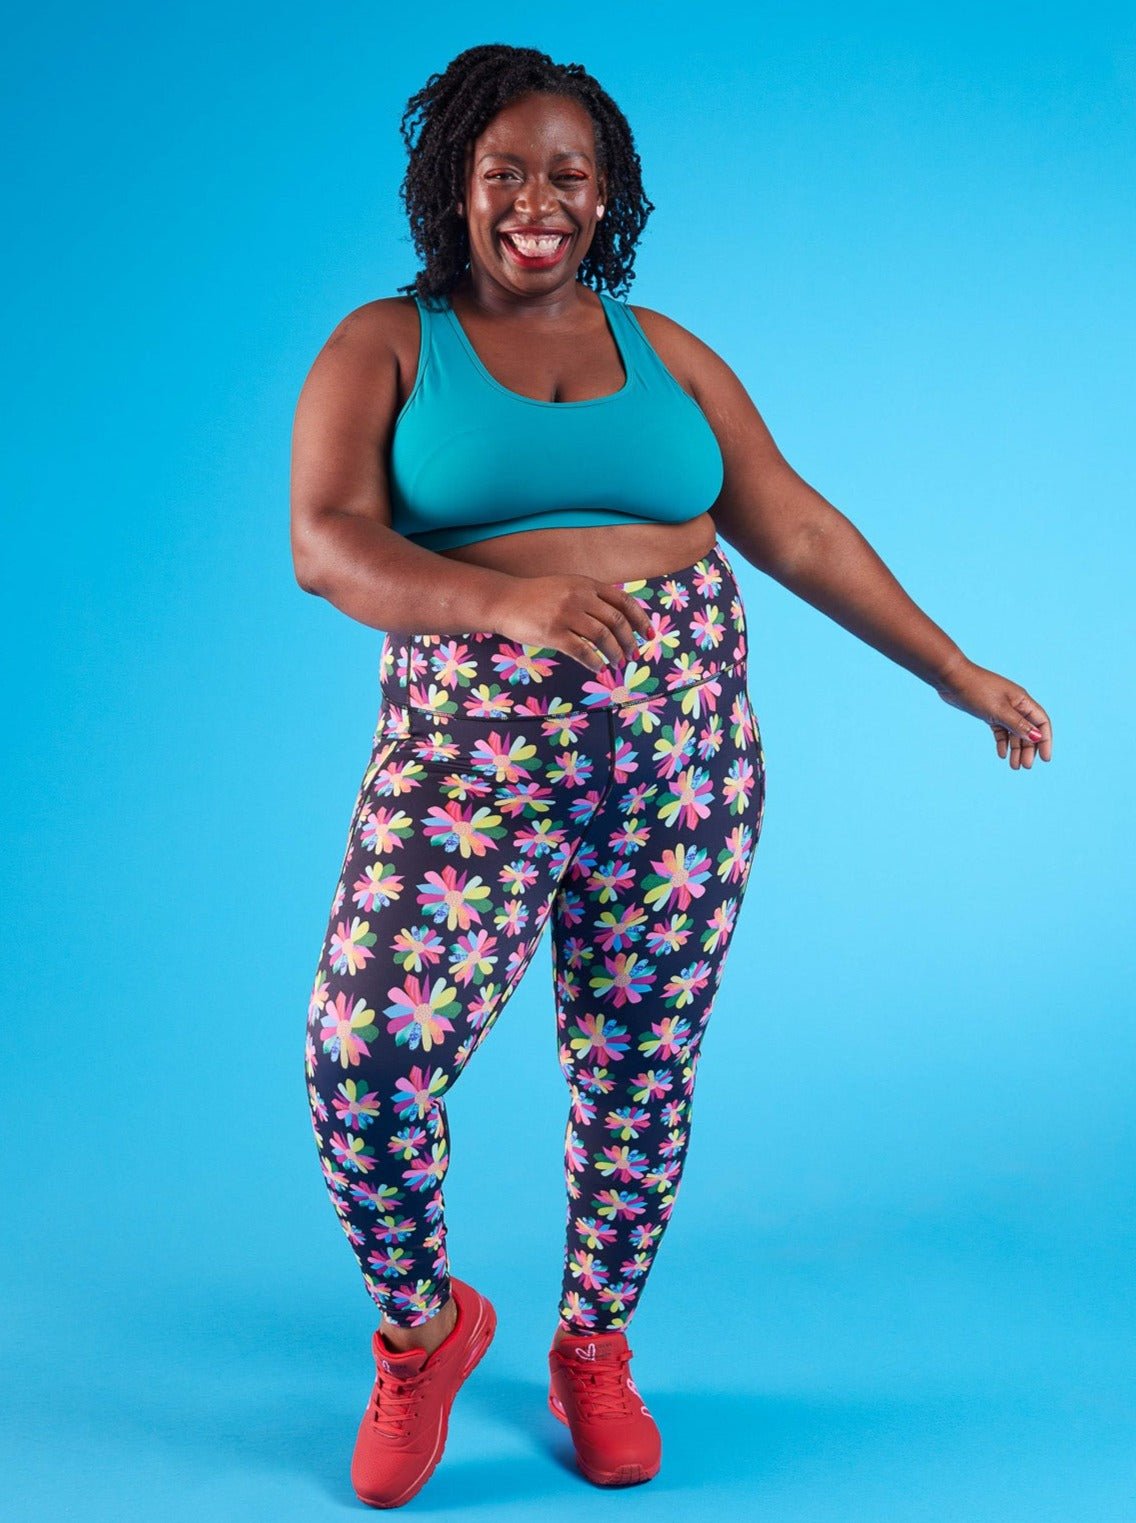 Plus Size Blue Leggings, Everyday Low Prices